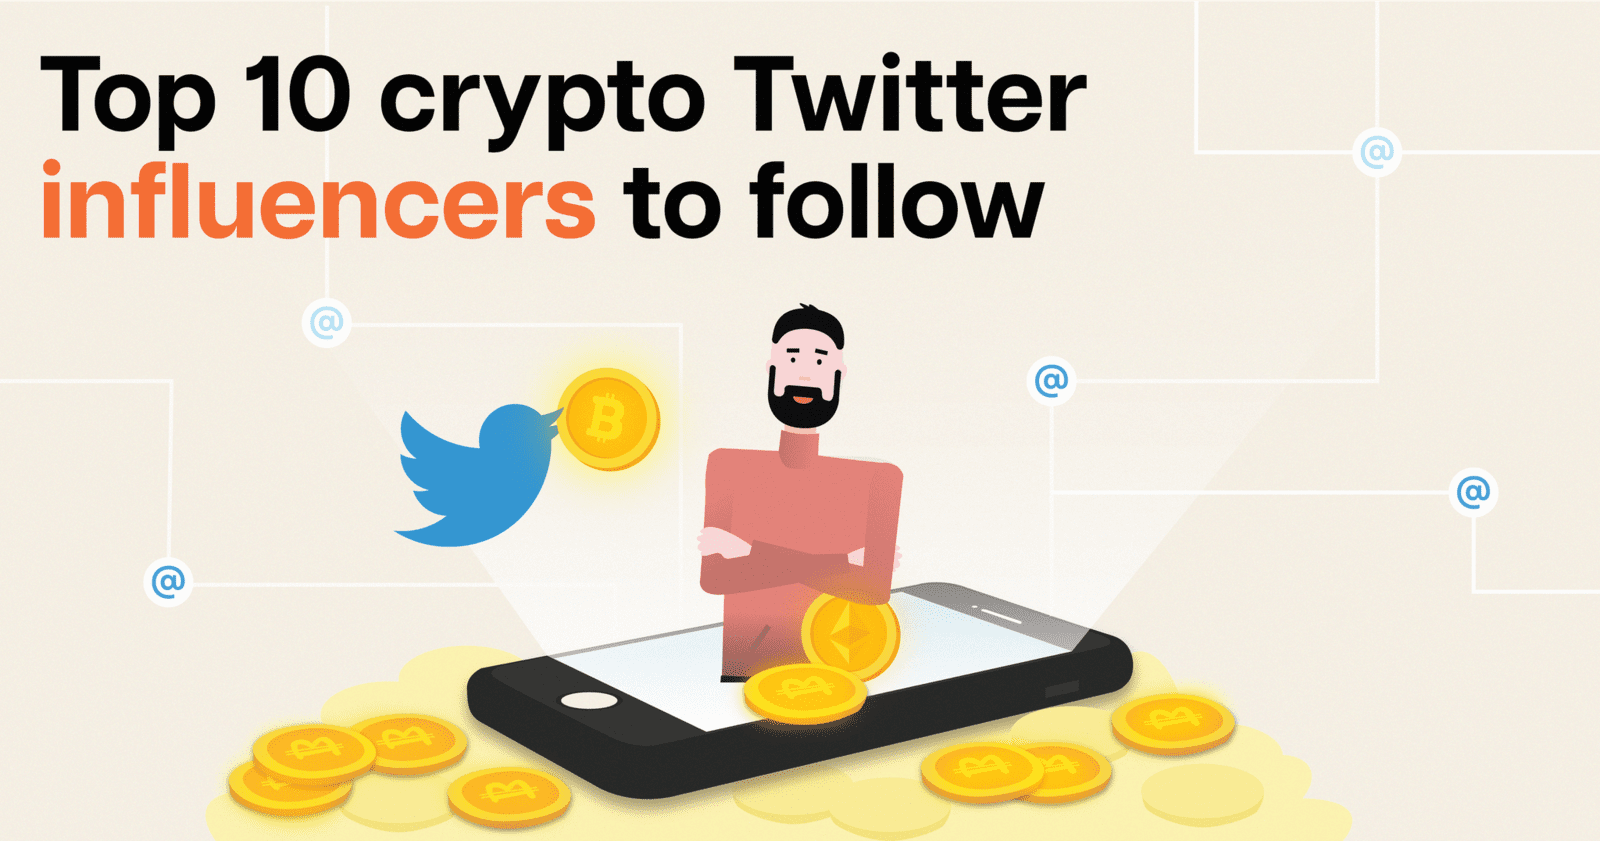 Top 10 Crypto-Twitter Influencers to Follow